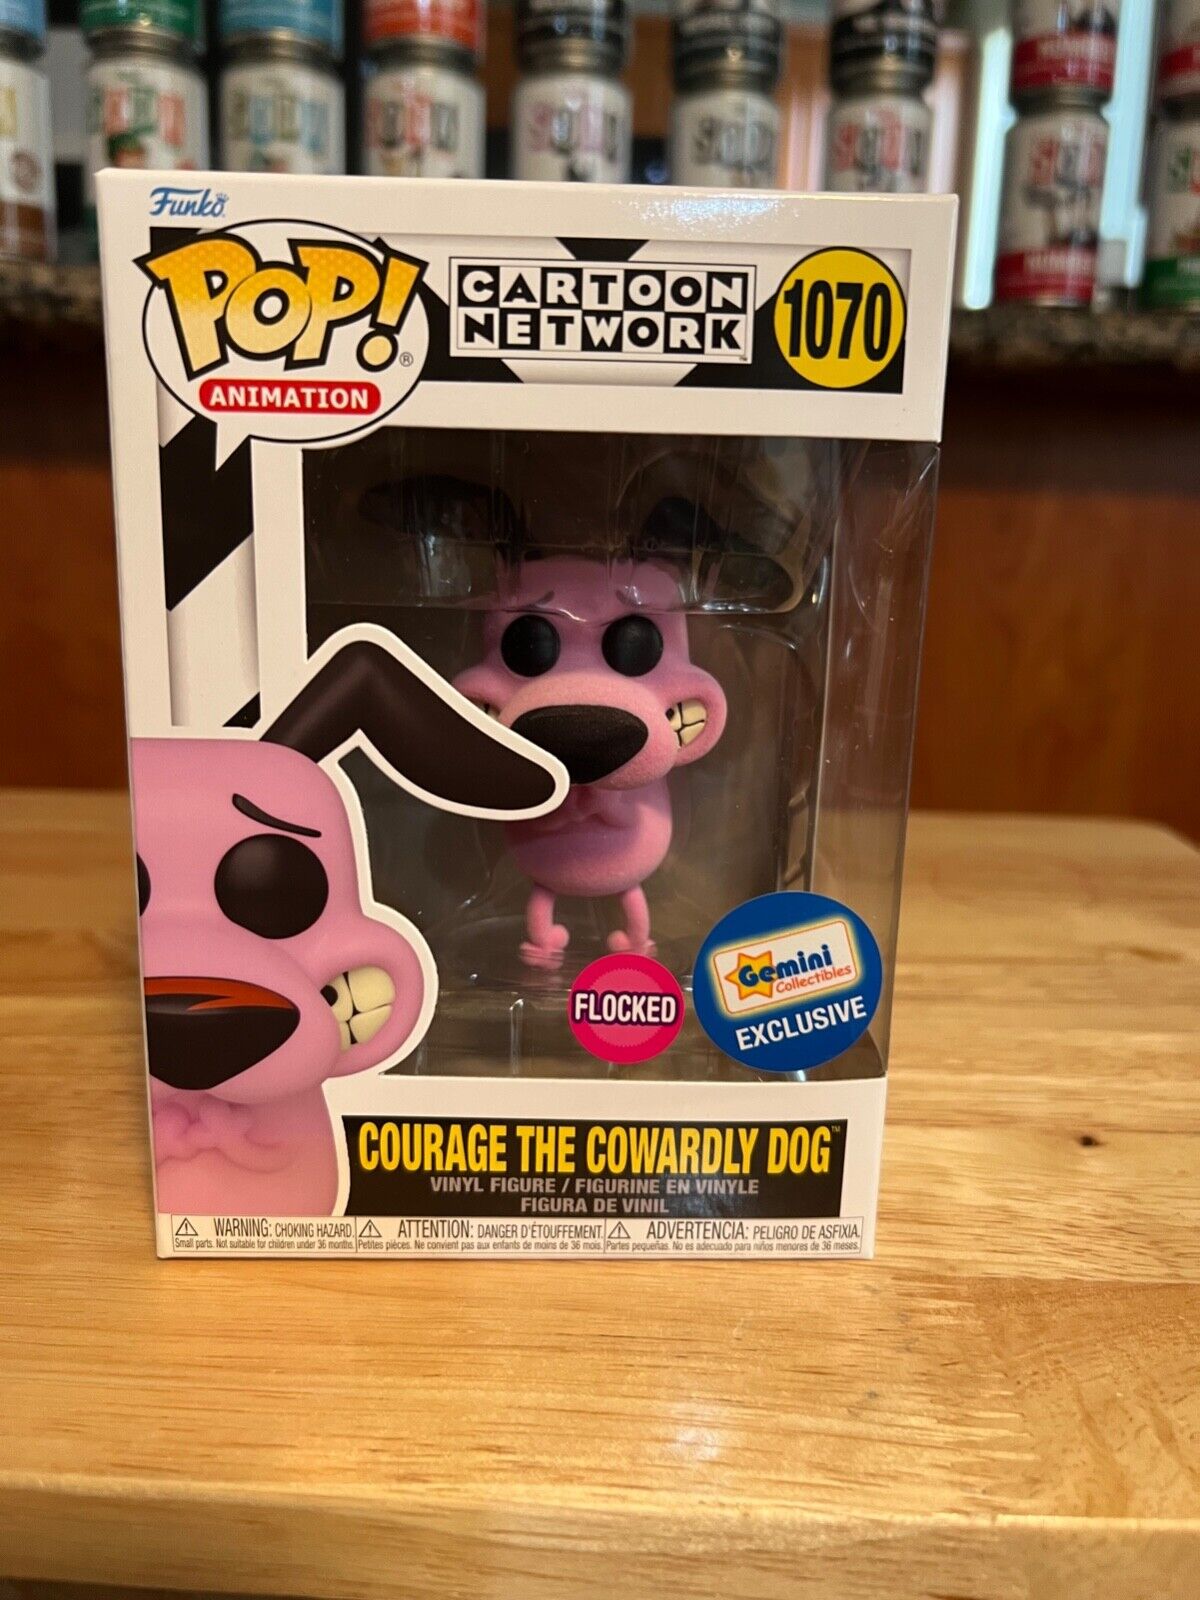 EXCLUSIVE FLOCKED (FUZZY) Courage the Cowardly Dog Funko Pop #1070 Animation